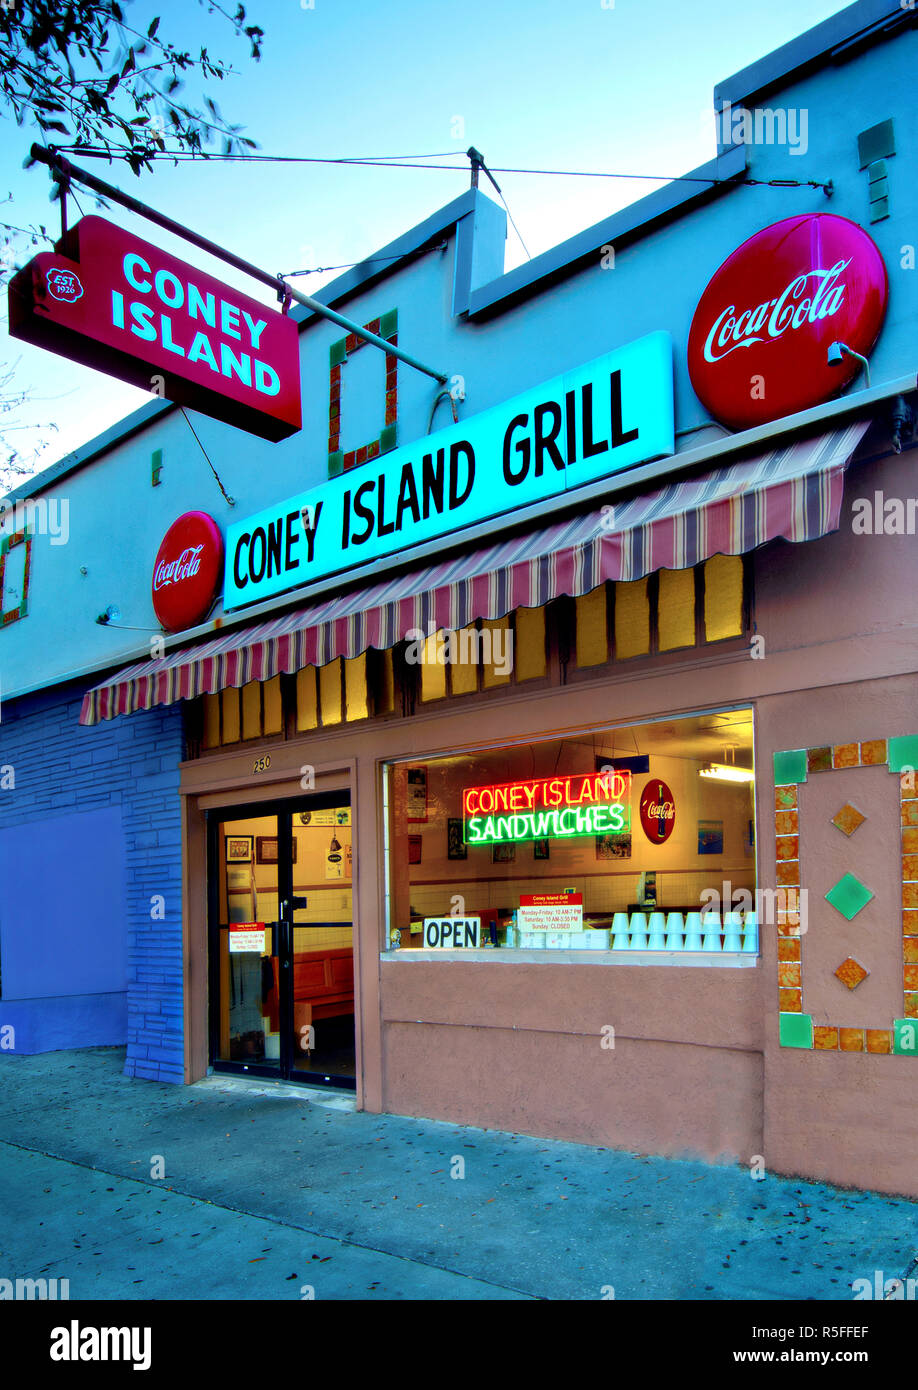 USA, Florida, Saint Petersburg, Coney Island Grill, Opened In 1926, Old Time Diner, Specializes In Hot Dogs Stock Photo